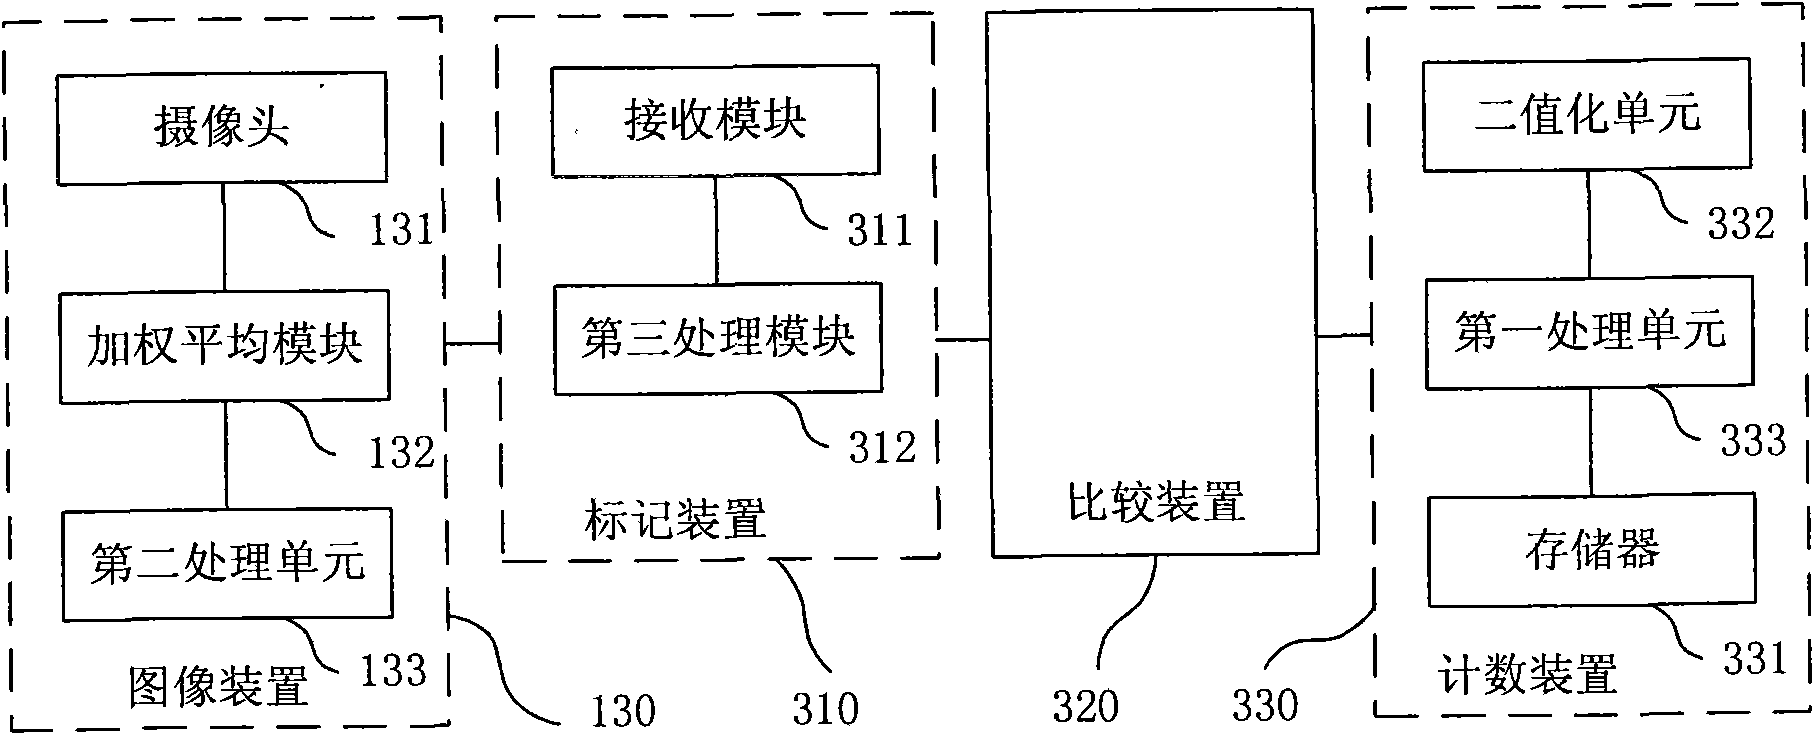 Method and system for counting number of people in car